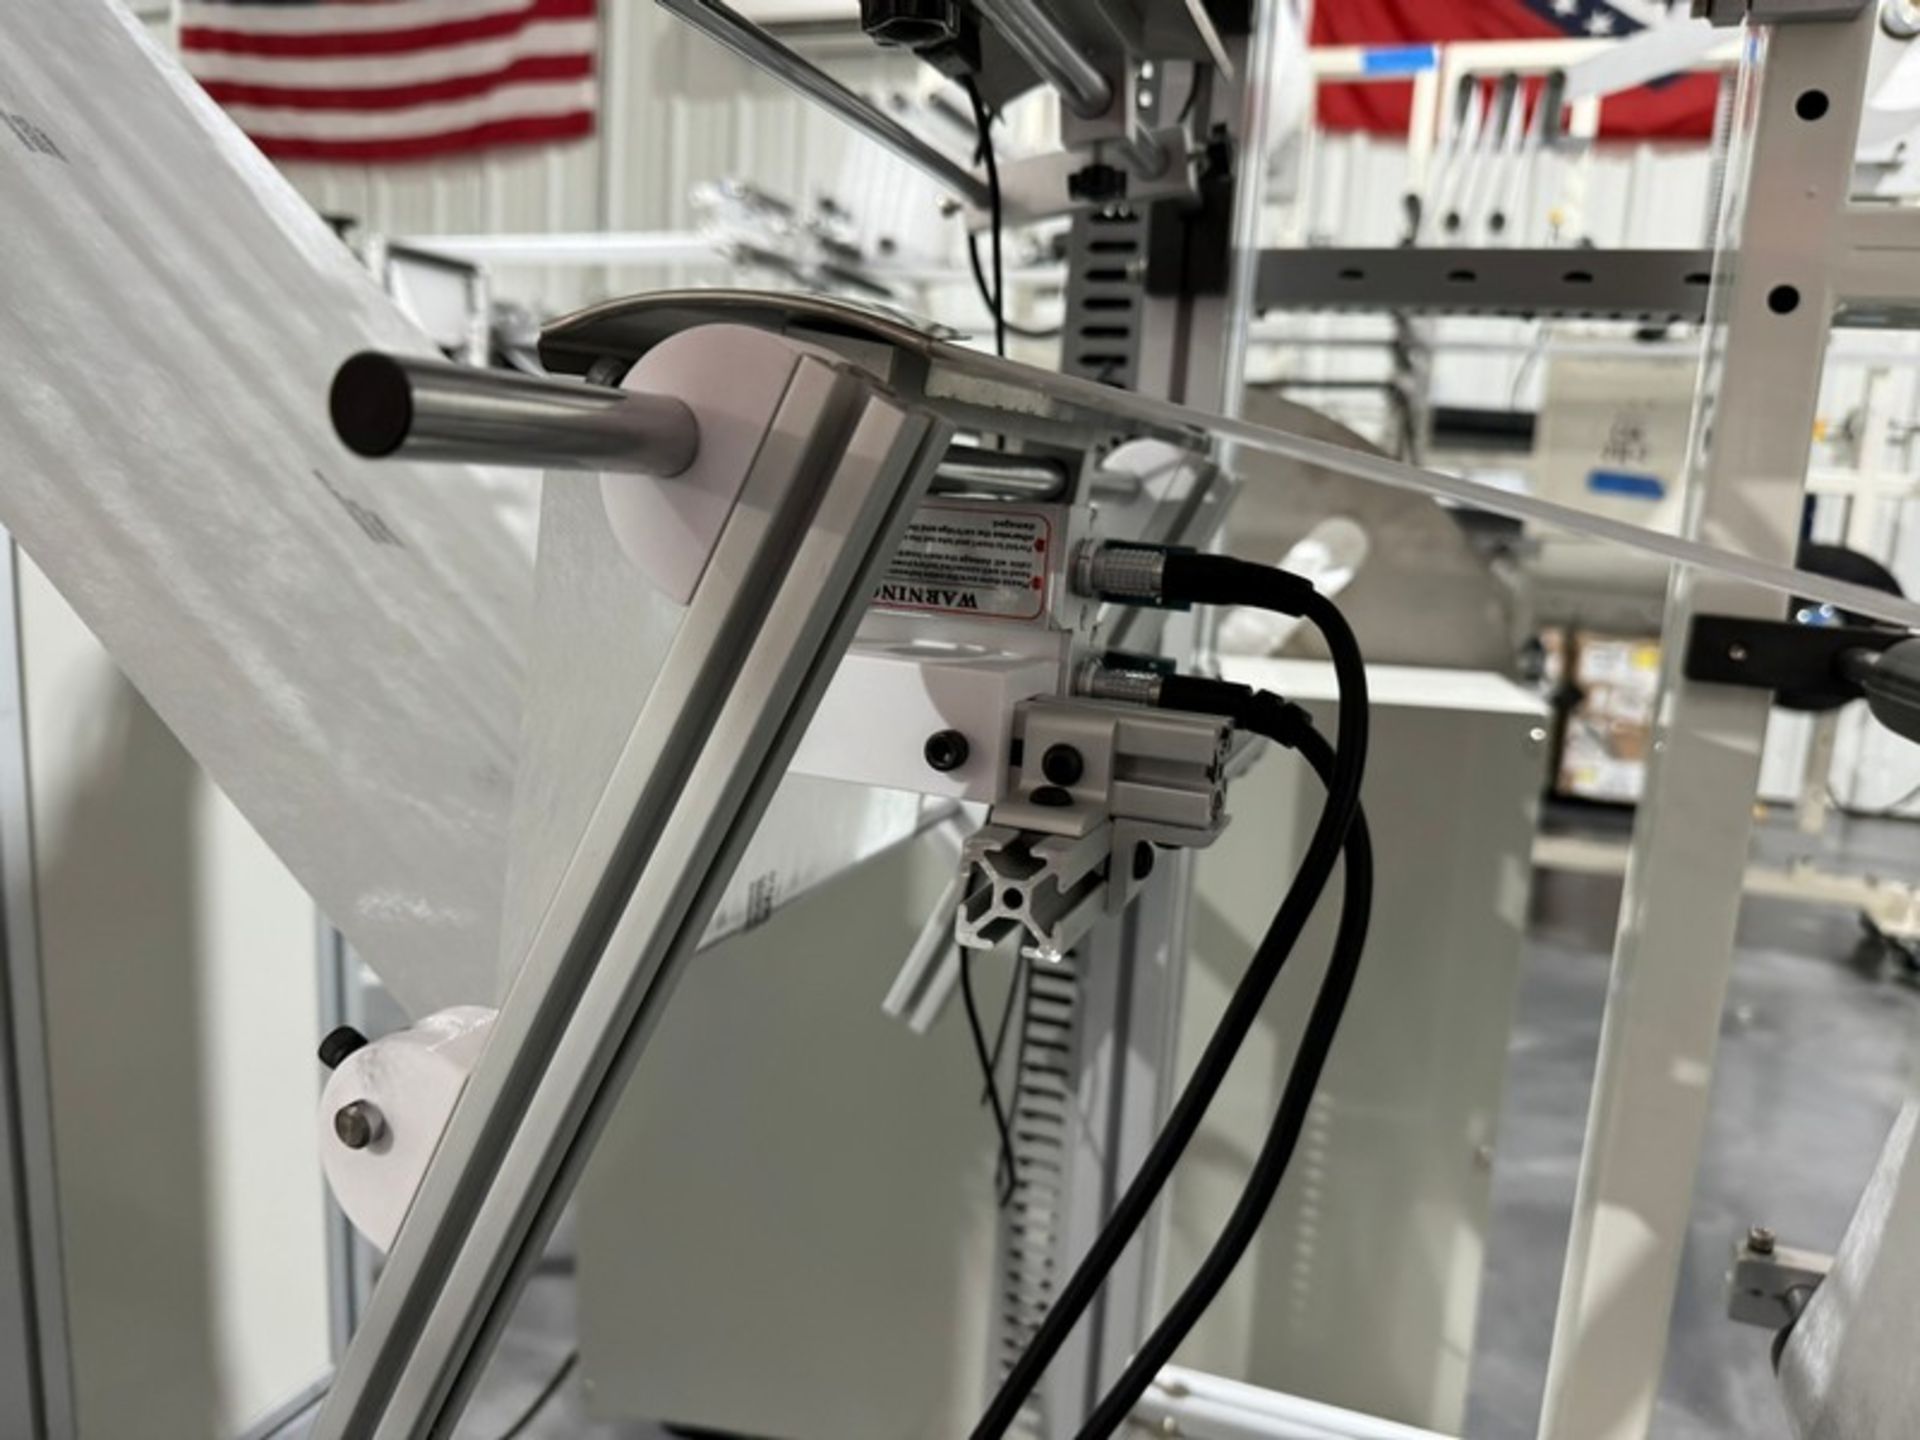 2022 KYD Automatic 6,000 Units Per Hour Mask Manufacturing Line, Includes Unwinding Station, Rolling - Image 30 of 30